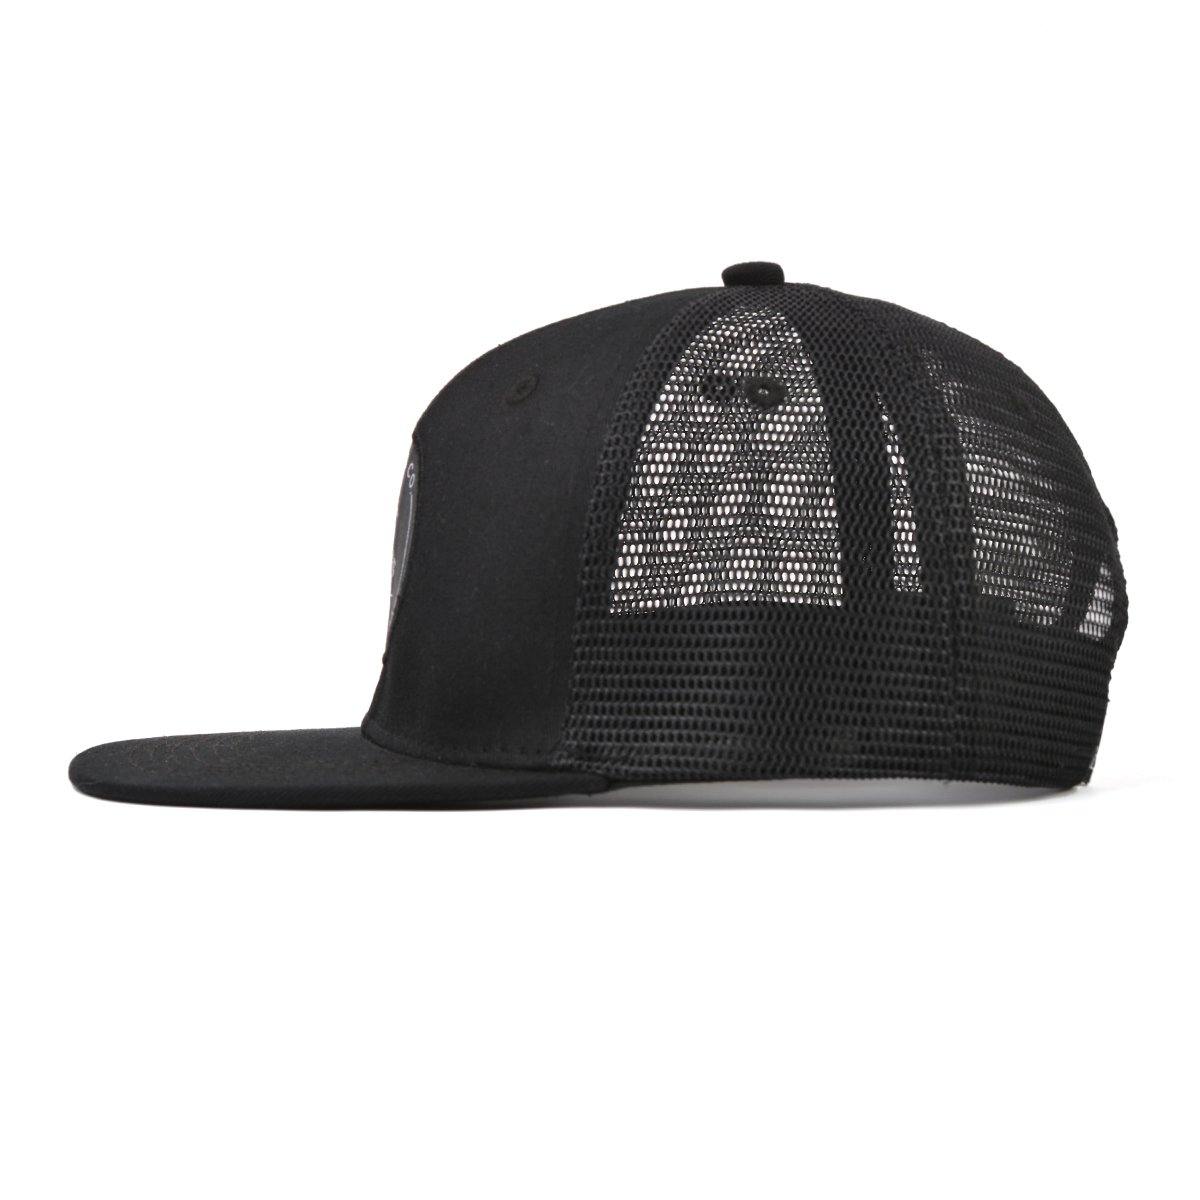 Black trucker hat for babies, toddlers, kids and adults. Cubs & Co. Australia